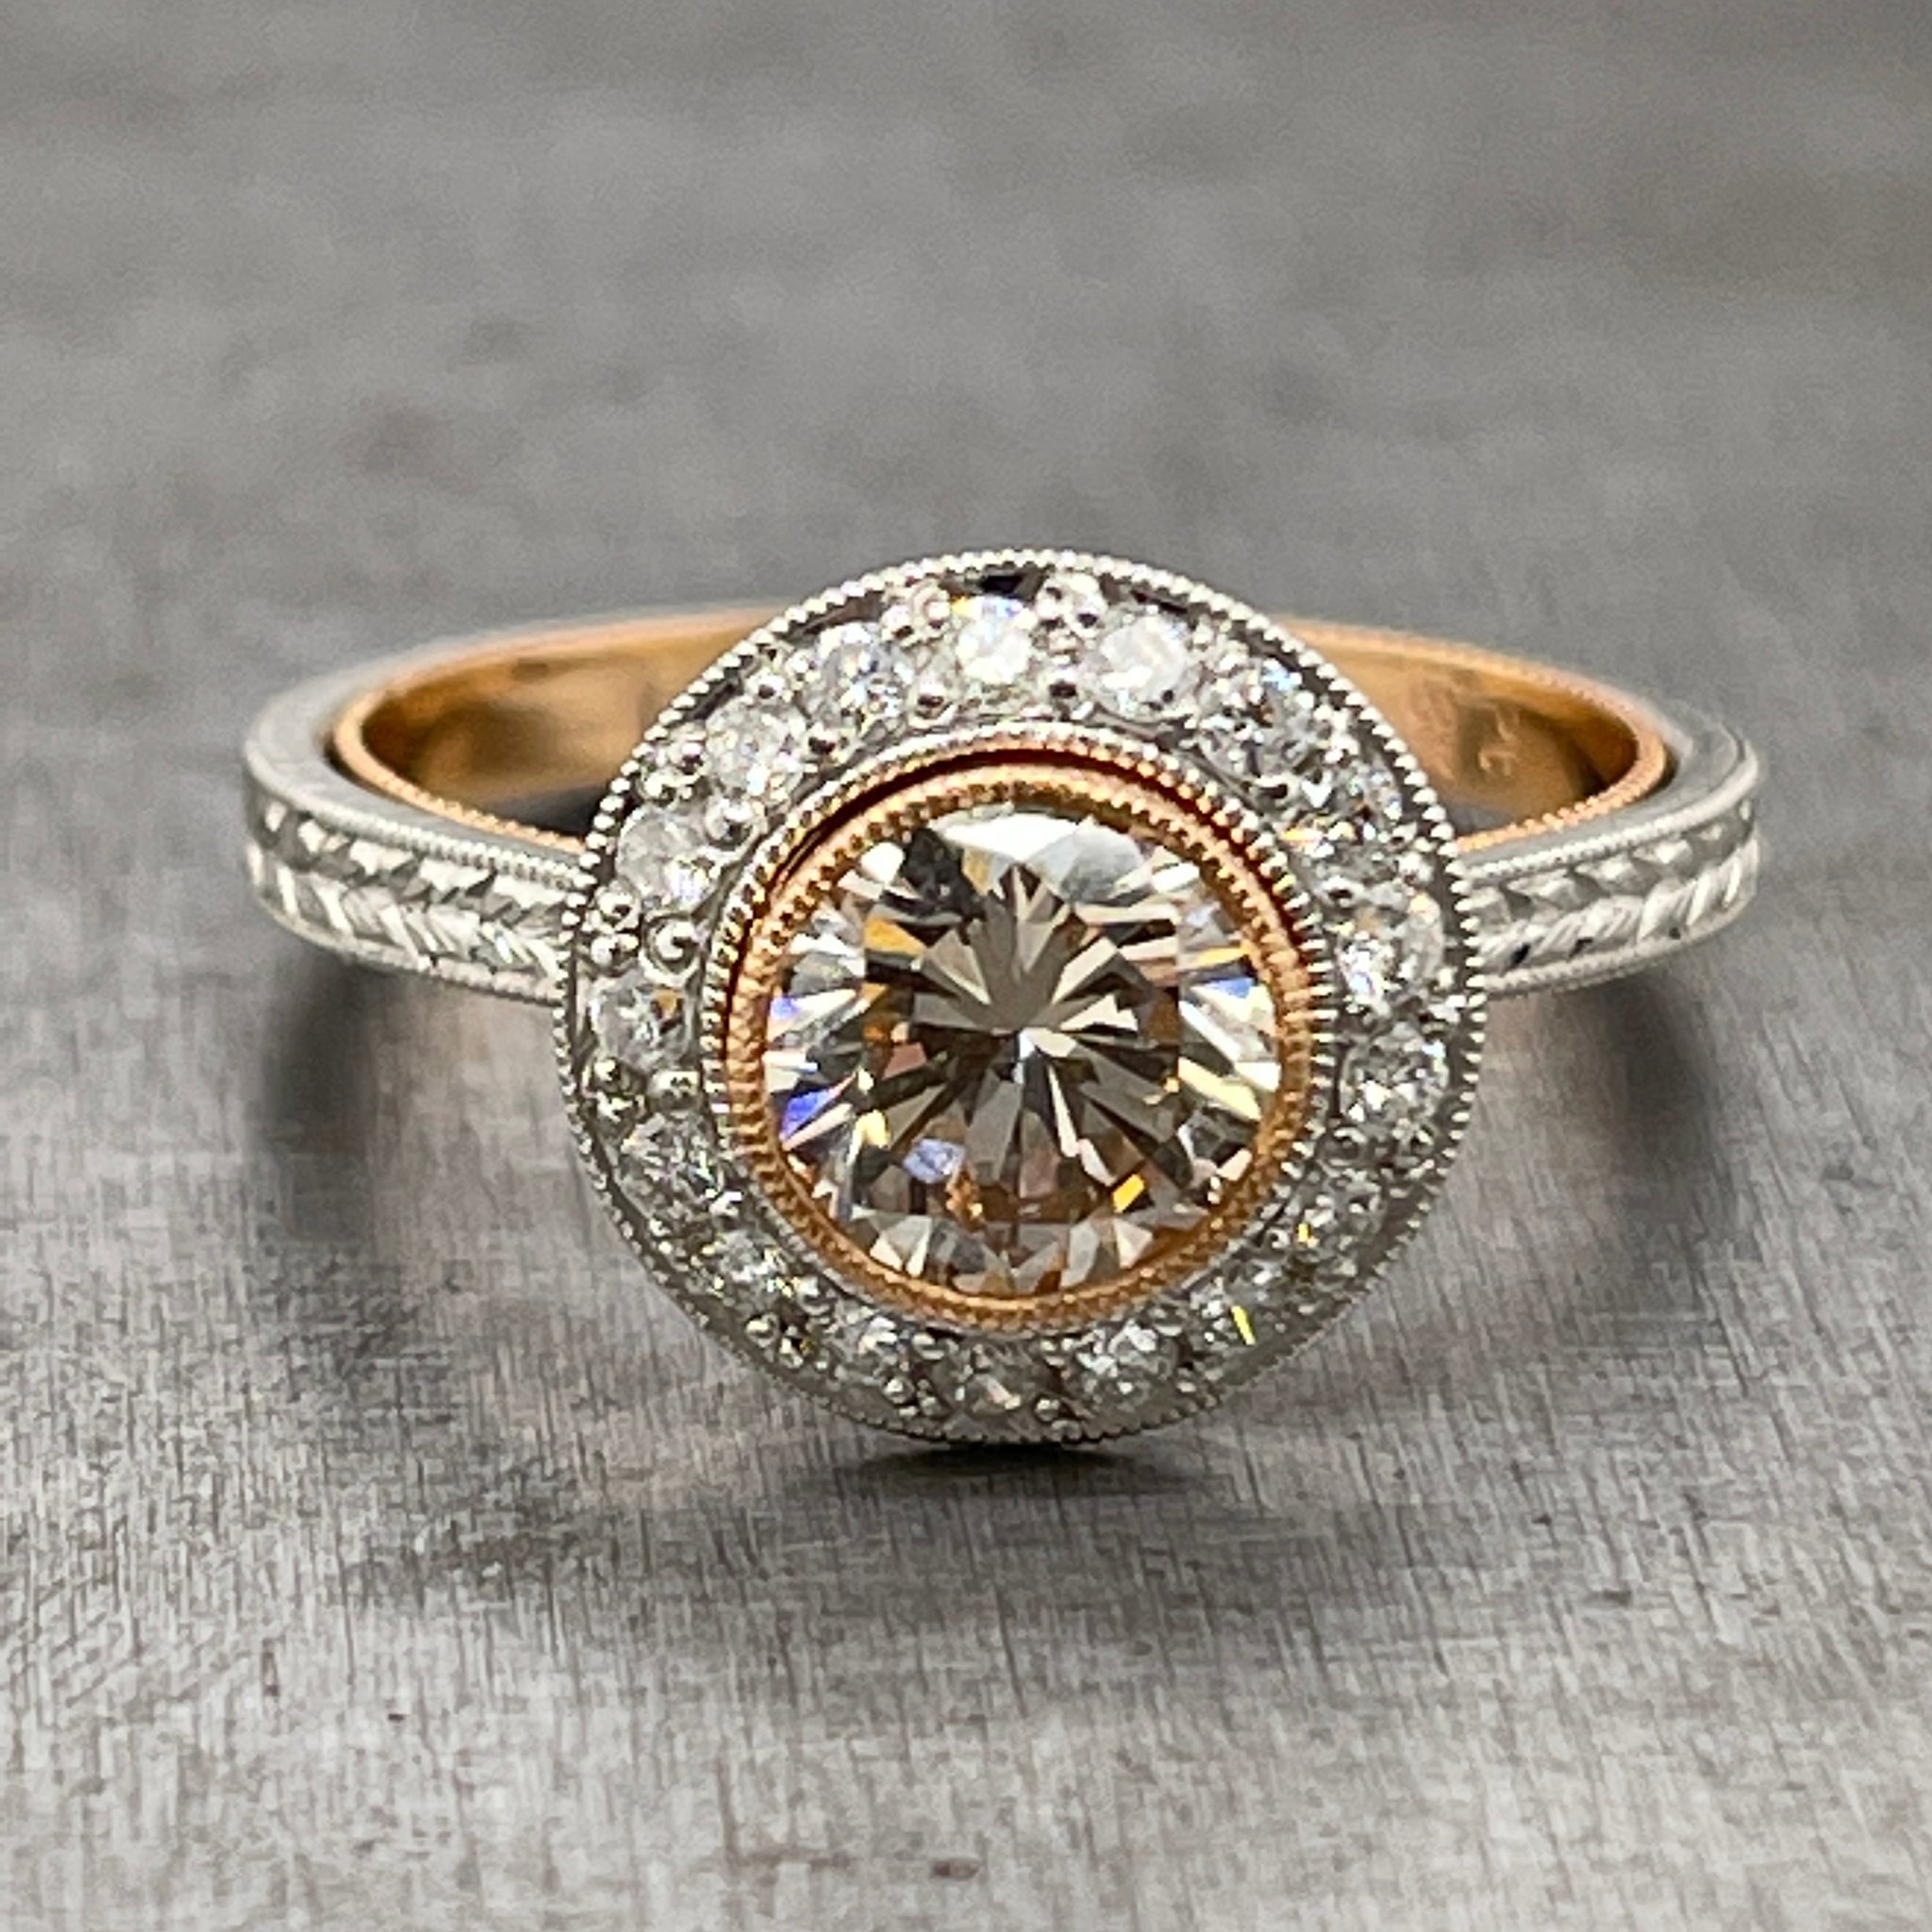 Front View of 18k Rose Gold and Platinum Champagne Diamond Ring